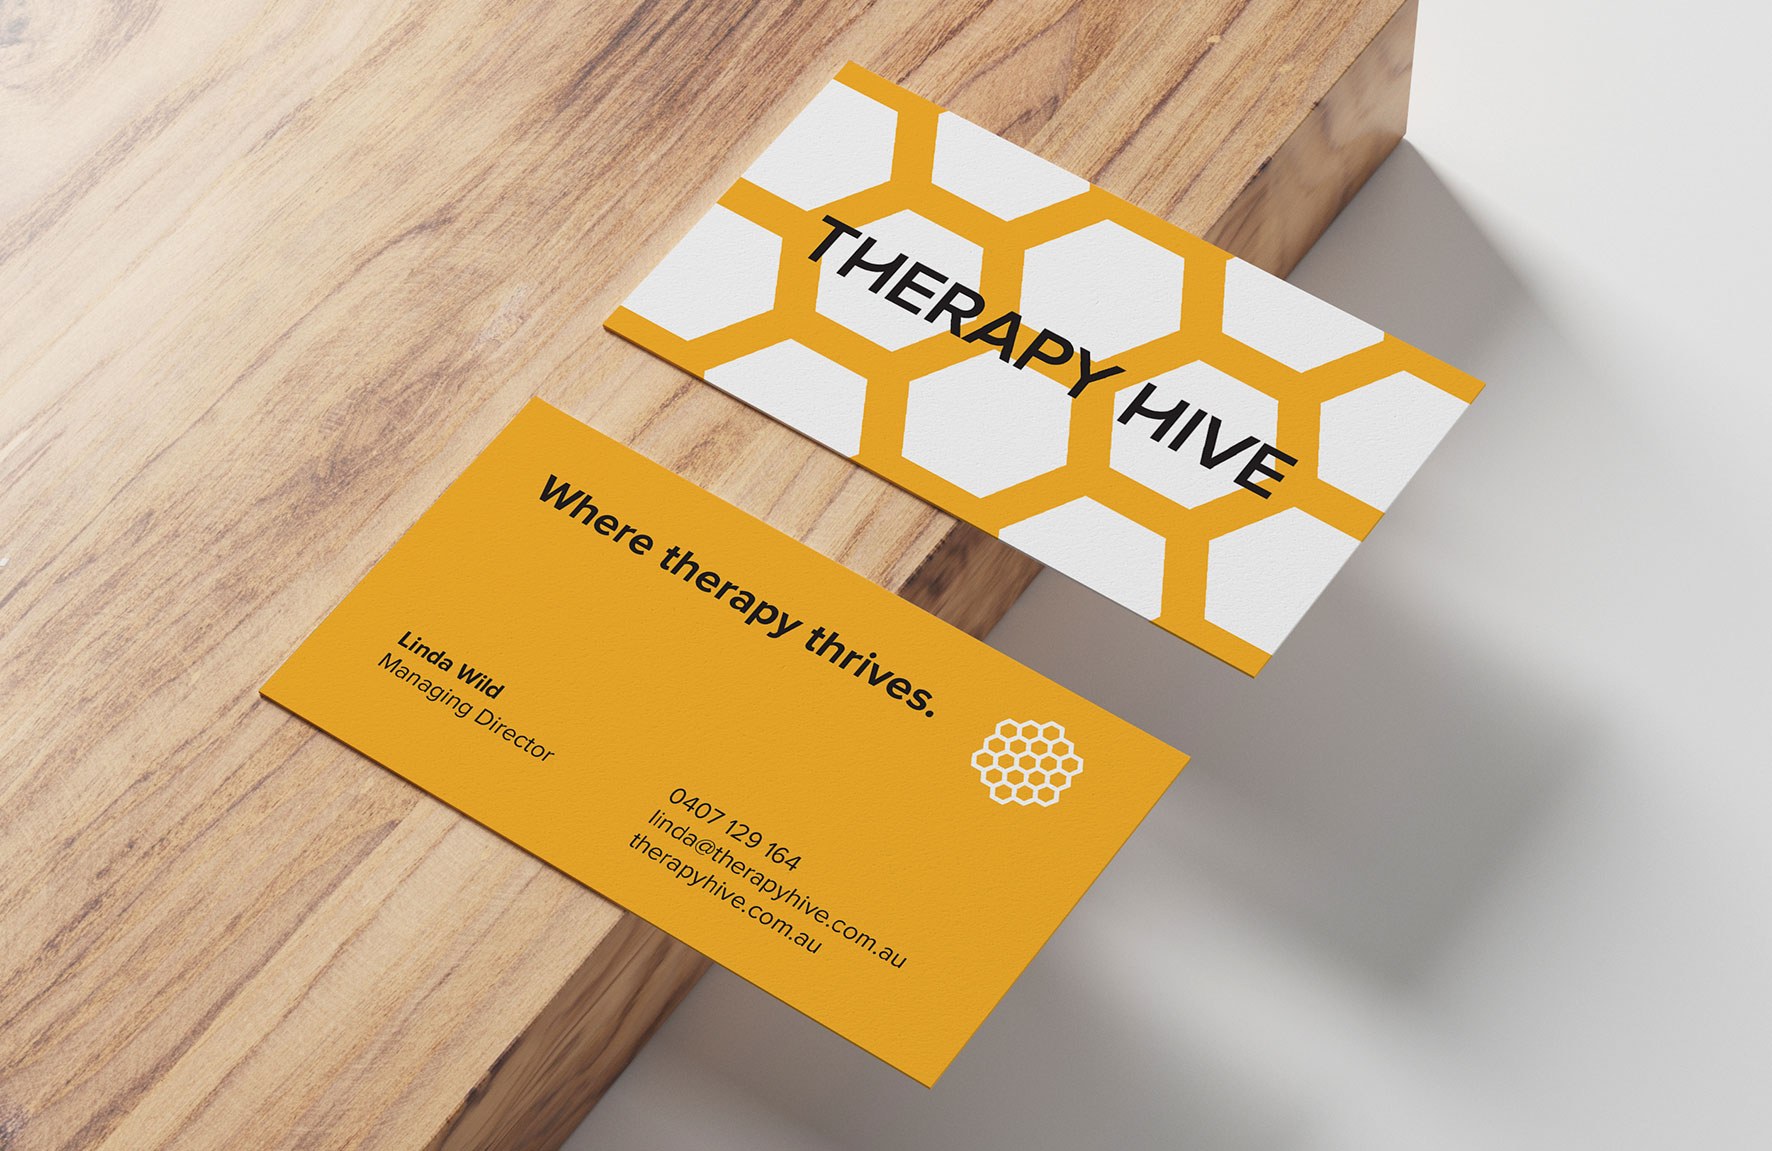 Therapy Hive Business Card Mockup